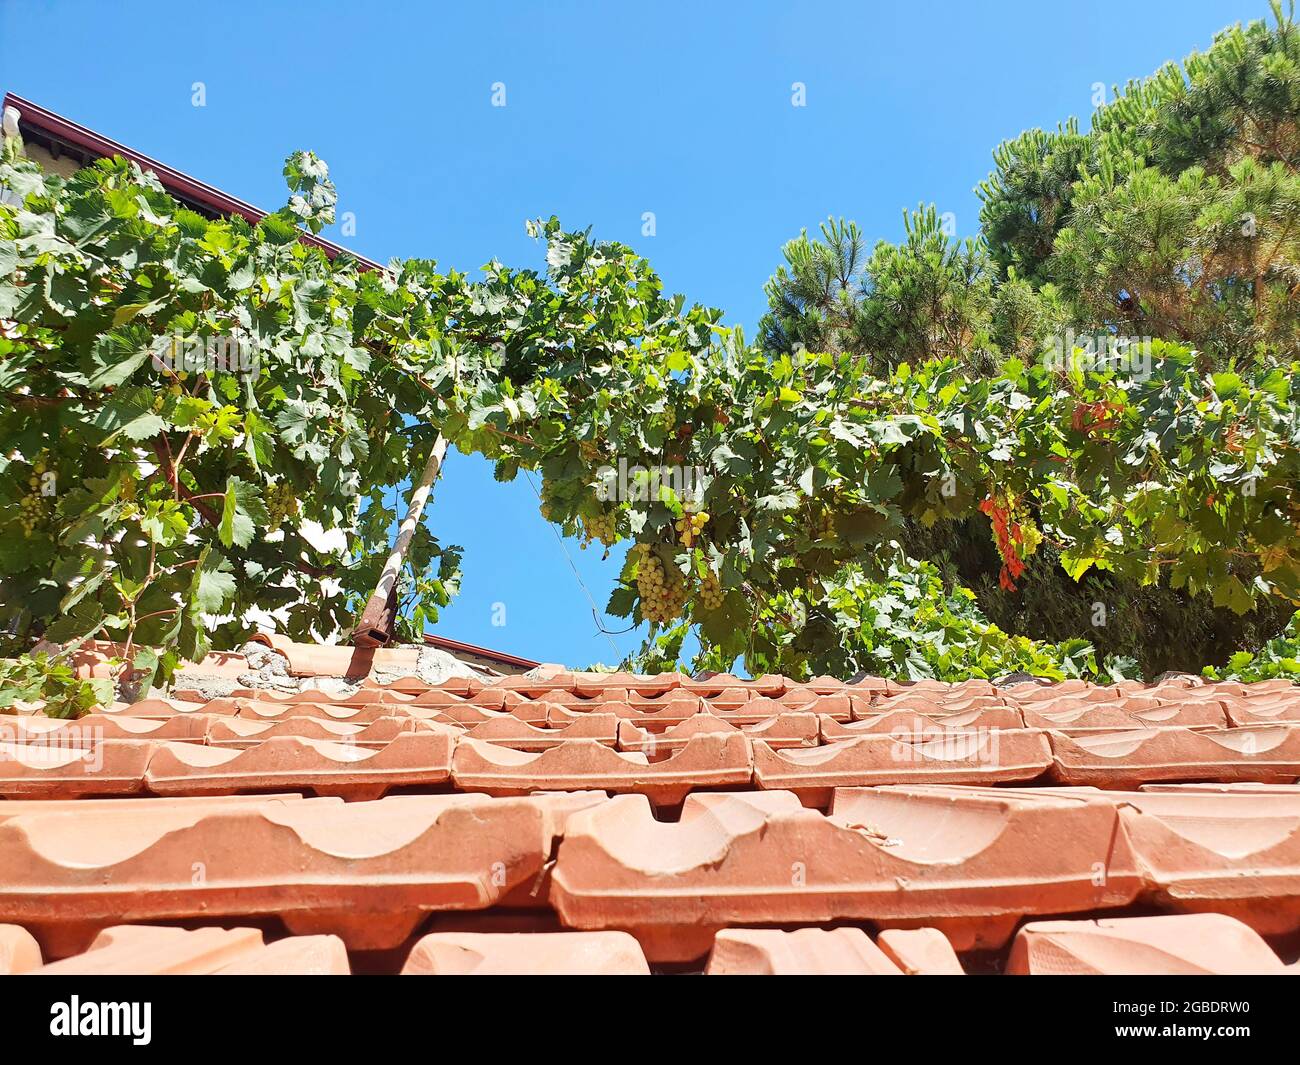 Large crumbs of grapes hang from the branches above the roof of the house. The fruits are large and will ripen soon in the warm summer sun. Stock Photo